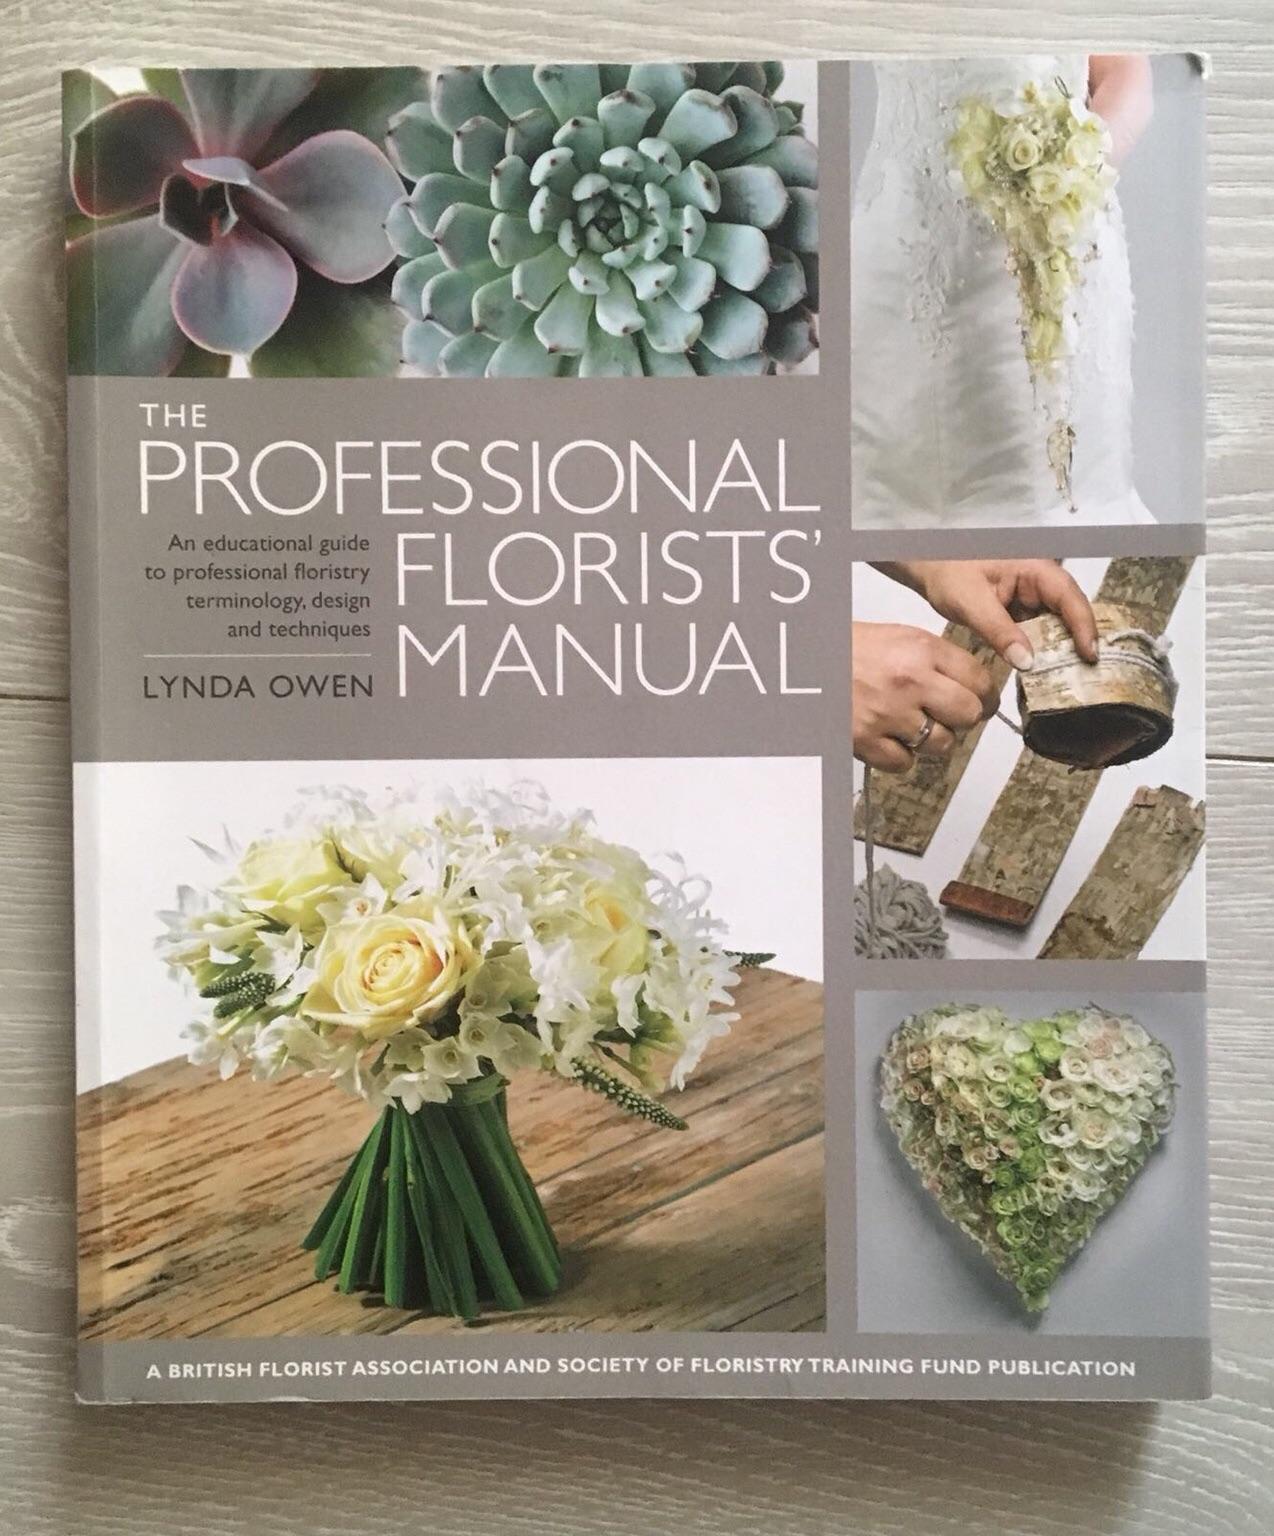 The Professional Florists Manual book in NE34 Tyneside for £25.00 for sale | Shpock